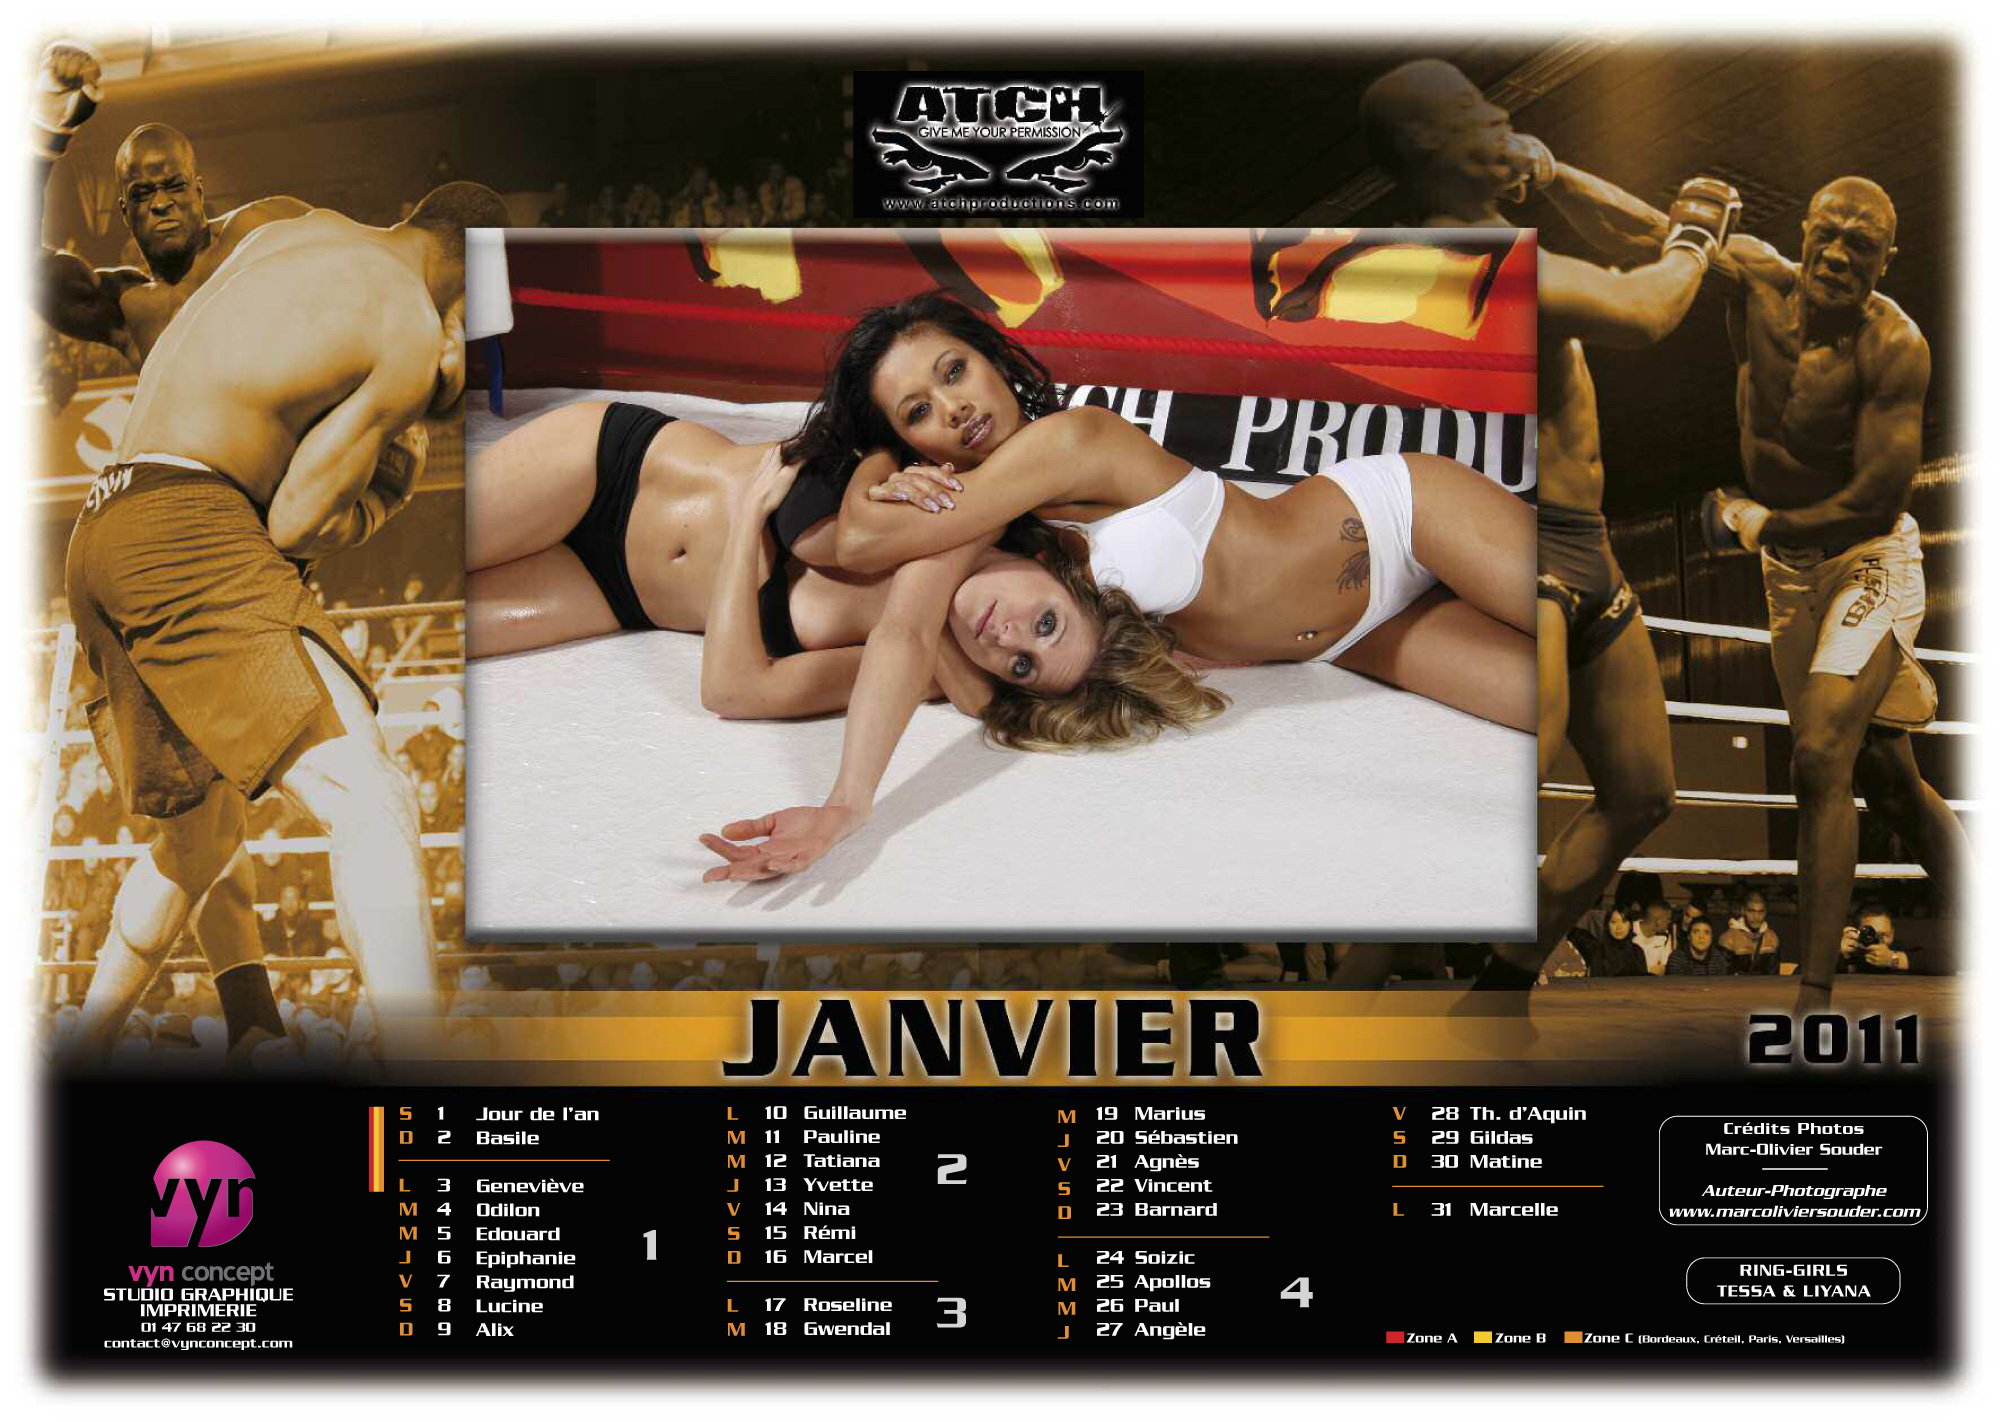 Atch Productions, 100 pour 100 fight, calendrier 2011, Liyana Apsara, Tessa